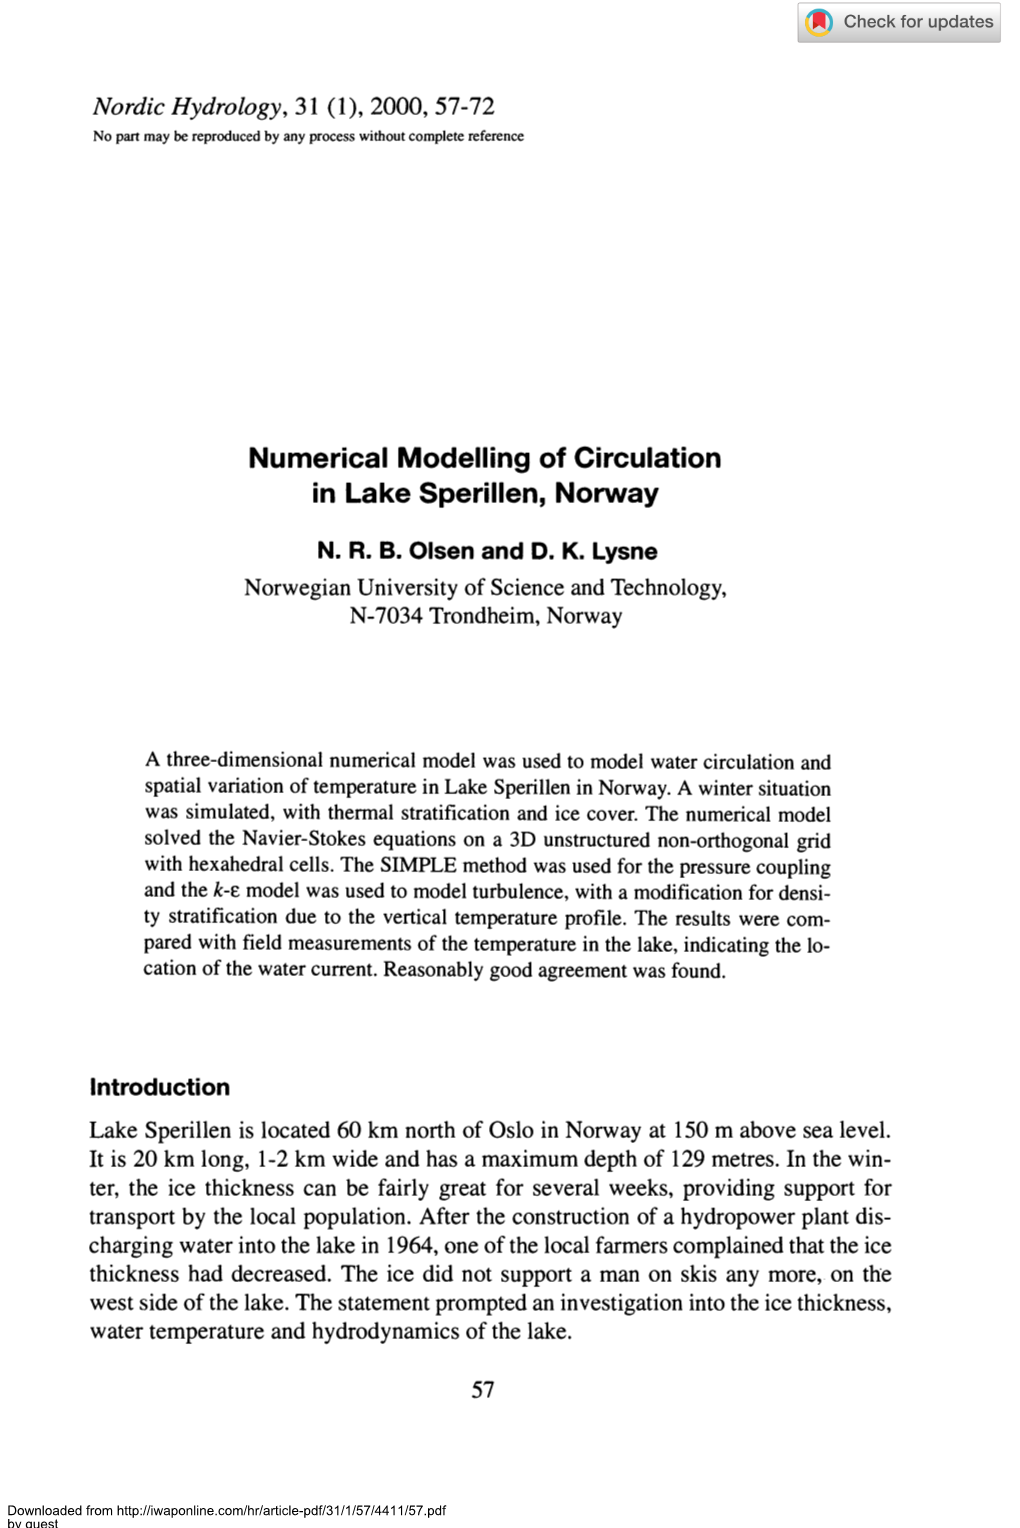 Numerical Modelling of Circulation in Lake Sperillen, Norway